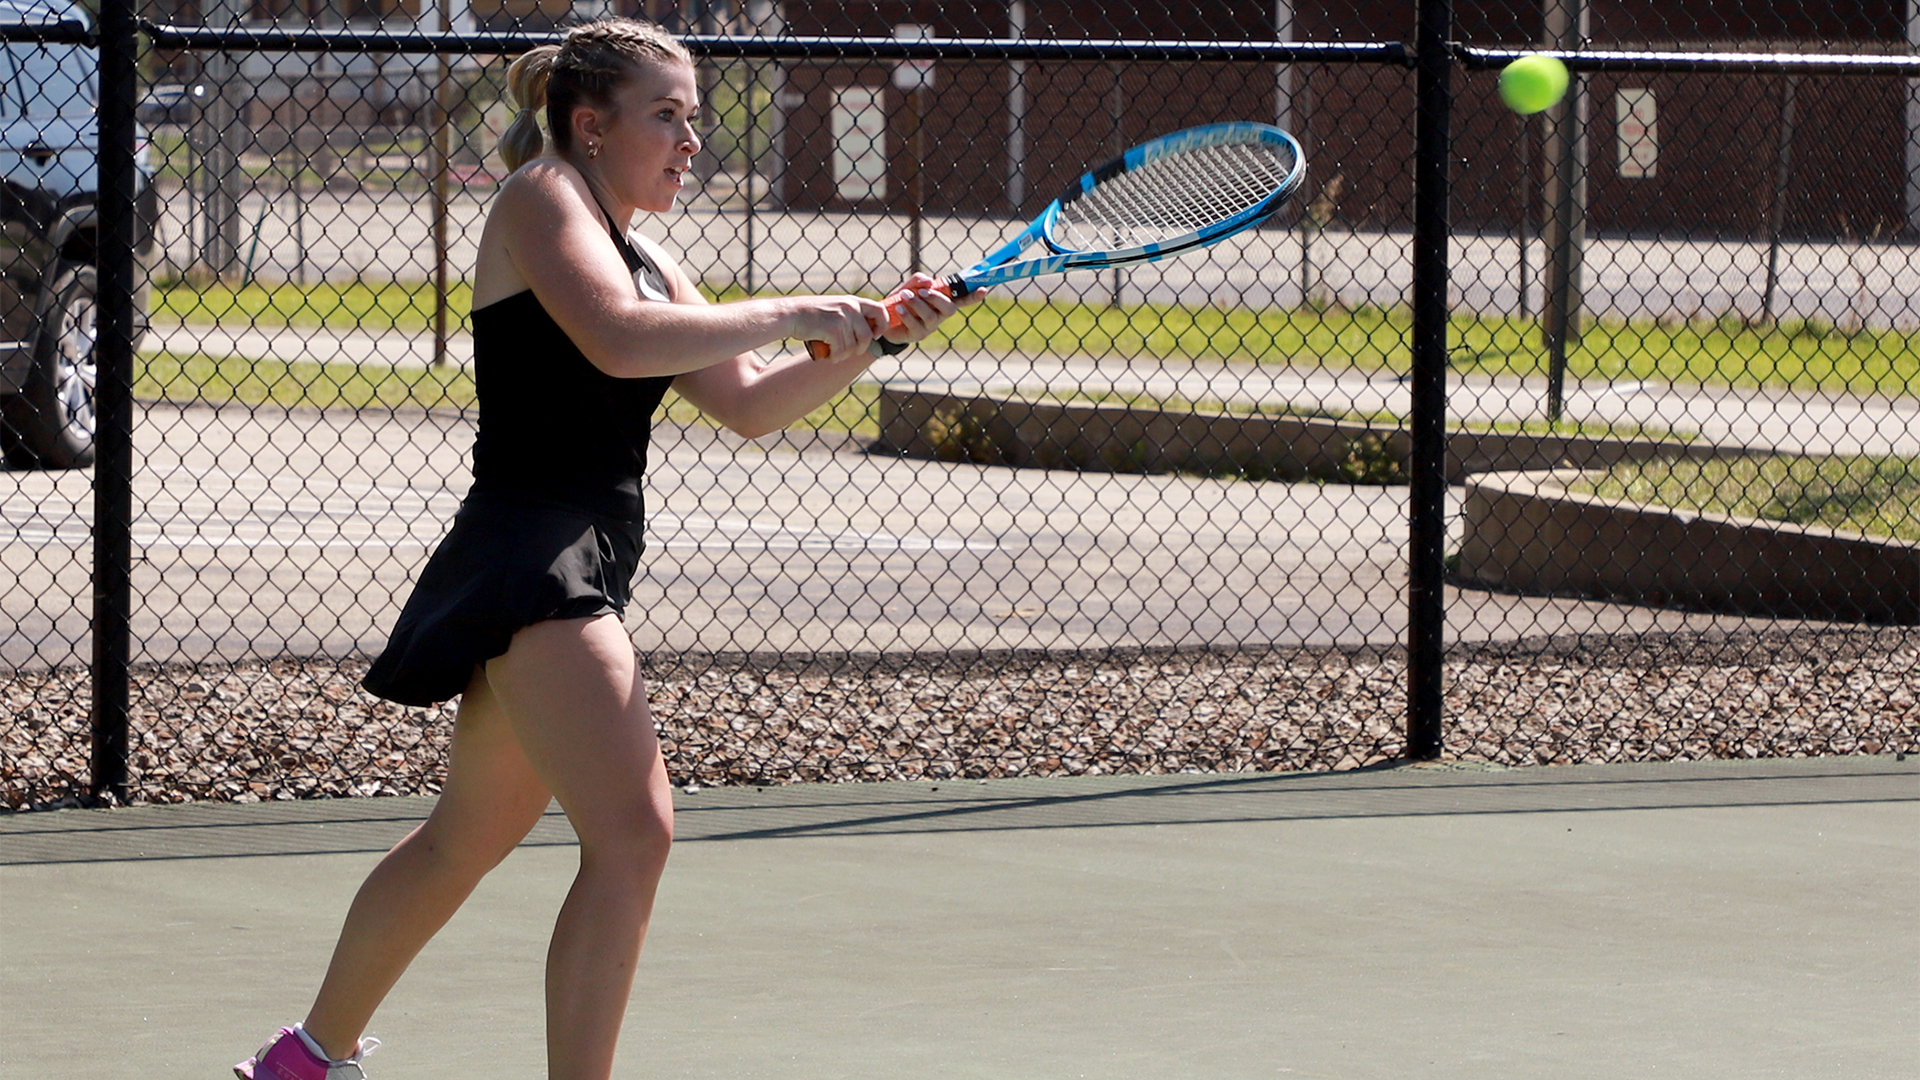 Julia Piatt secured wins in the No. 1 doubles and No. 2 singles spots. Photo by Robert Cifone.